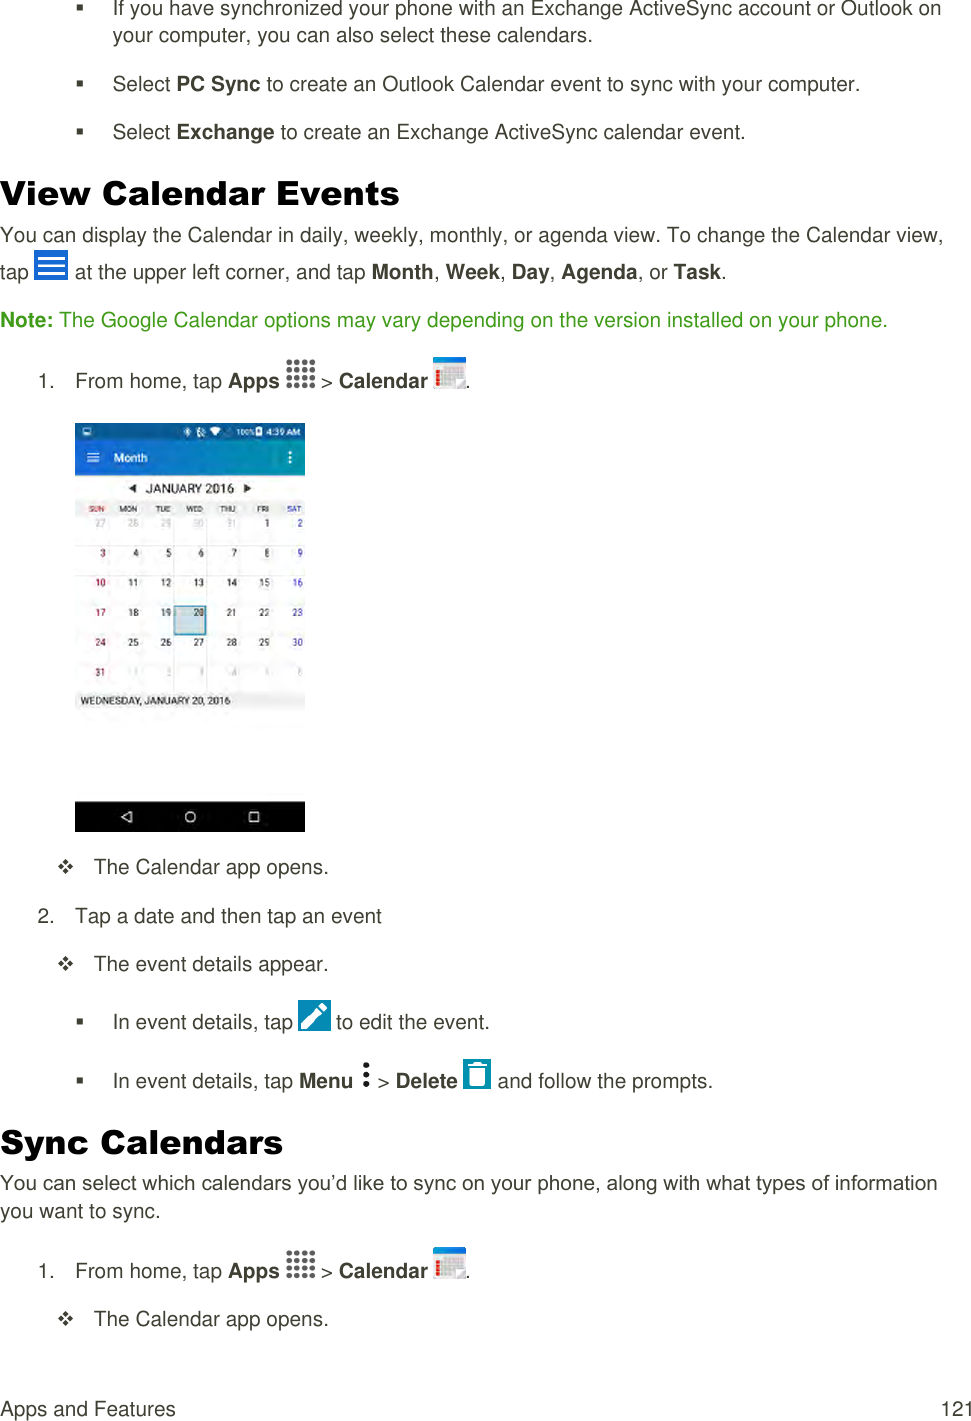 Apps and Features  121   If you have synchronized your phone with an Exchange ActiveSync account or Outlook on your computer, you can also select these calendars.    Select PC Sync to create an Outlook Calendar event to sync with your computer.   Select Exchange to create an Exchange ActiveSync calendar event. View Calendar Events You can display the Calendar in daily, weekly, monthly, or agenda view. To change the Calendar view, tap   at the upper left corner, and tap Month, Week, Day, Agenda, or Task. Note: The Google Calendar options may vary depending on the version installed on your phone. 1.  From home, tap Apps   &gt; Calendar  .     The Calendar app opens. 2.  Tap a date and then tap an event    The event details appear.   In event details, tap   to edit the event.   In event details, tap Menu   &gt; Delete   and follow the prompts. Sync Calendars You can select which calendars you’d like to sync on your phone, along with what types of information you want to sync. 1.  From home, tap Apps   &gt; Calendar  .    The Calendar app opens. 